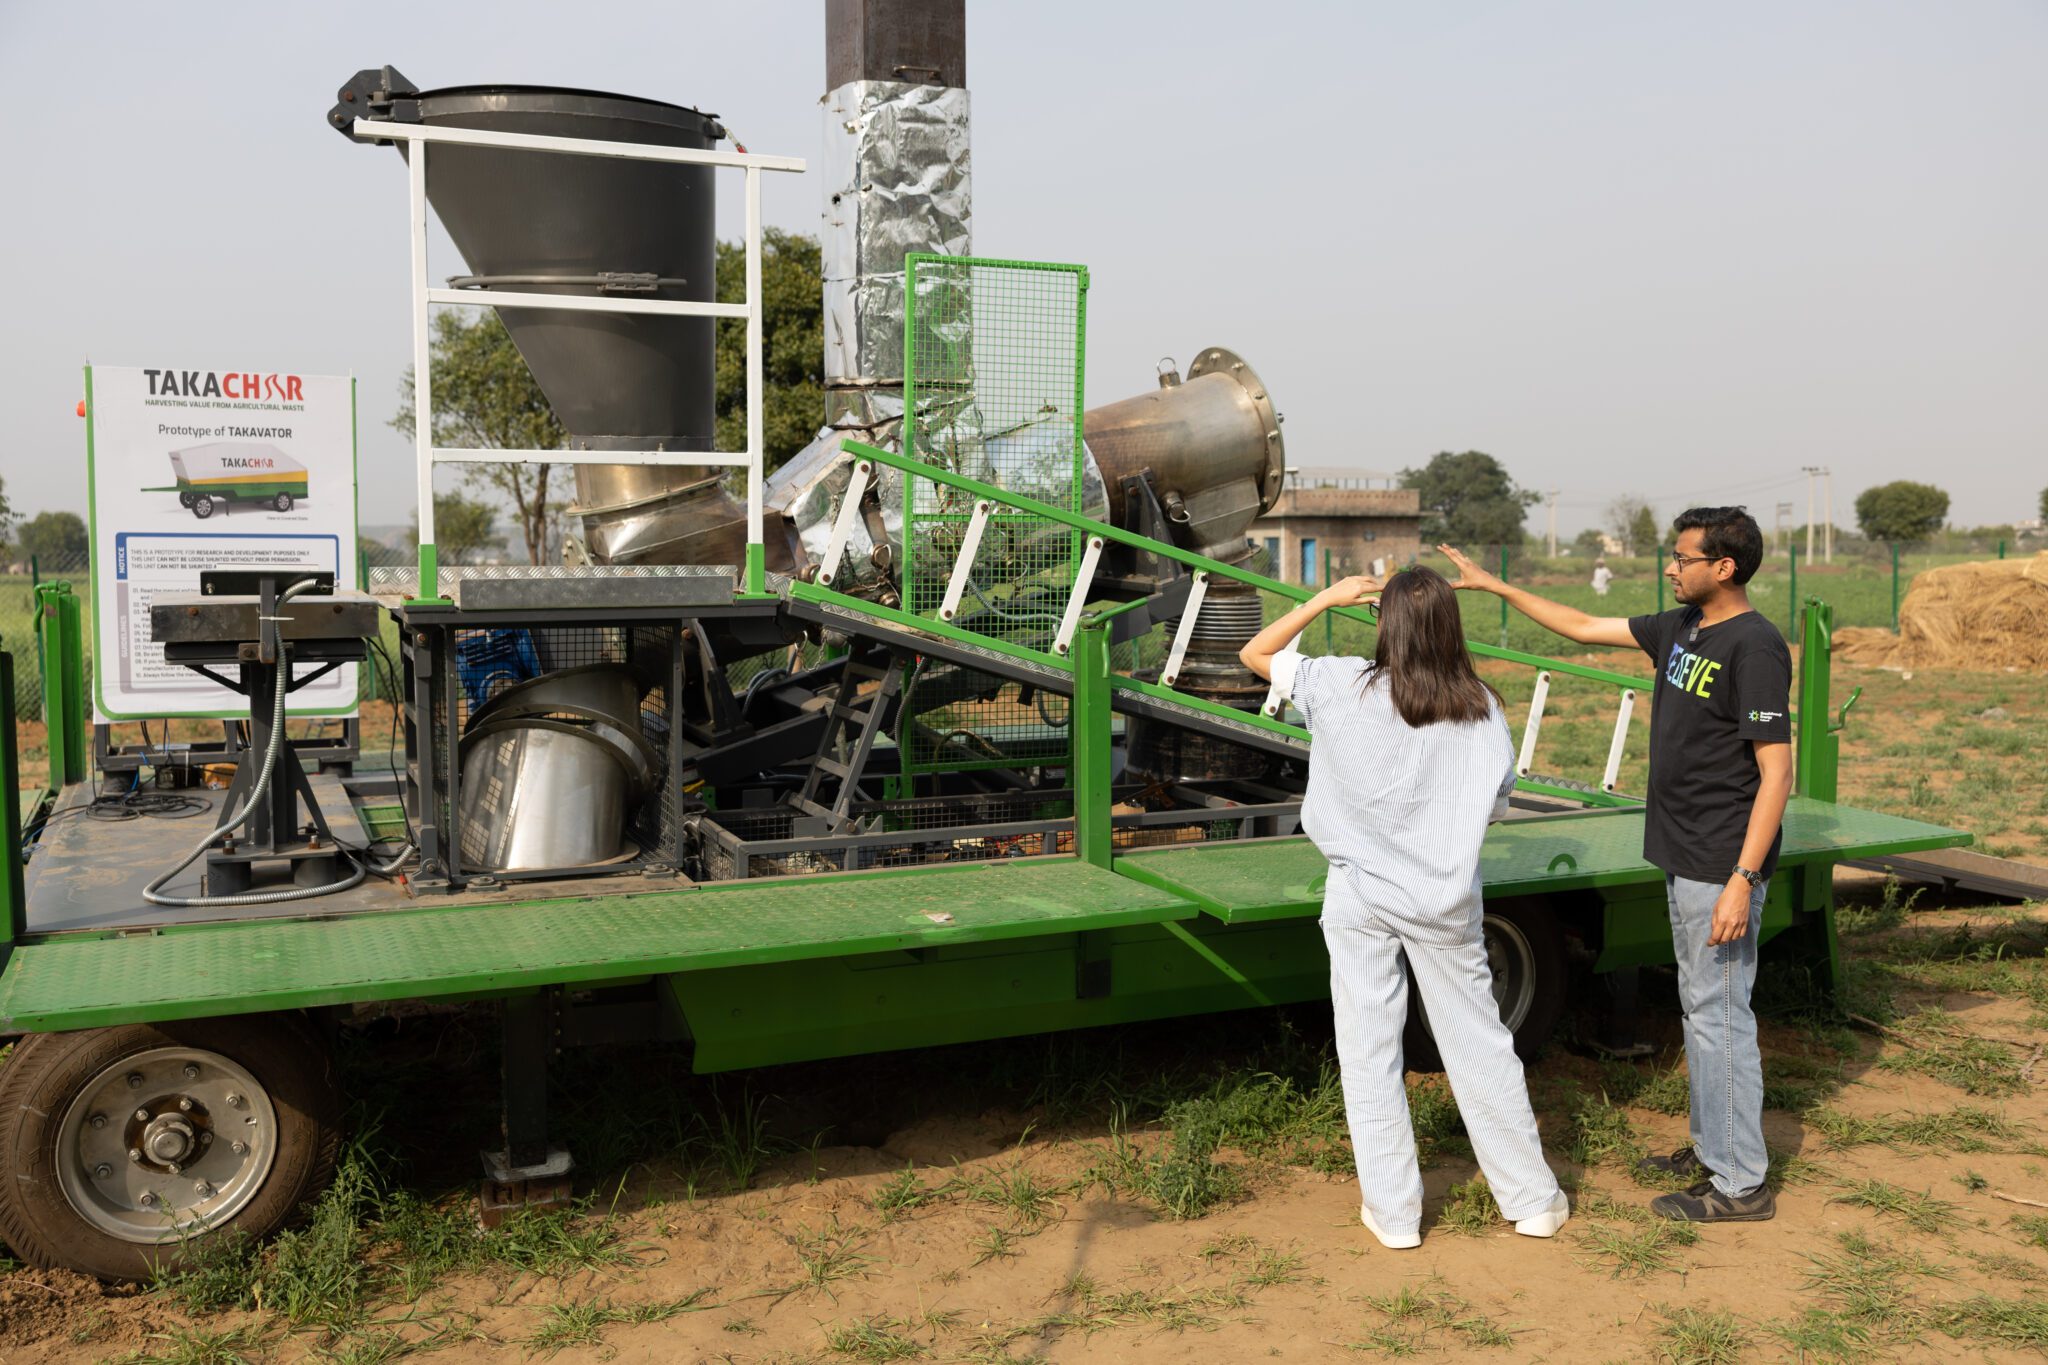 Vidyut Mohan, Co-founder and CEO of Takachar, shows content creator Prajakta Koli Takachar’s groundbreaking technology—a portable machine that attaches to tractors and turns crop waste into biofuels, fertilizers, and other valuable products.